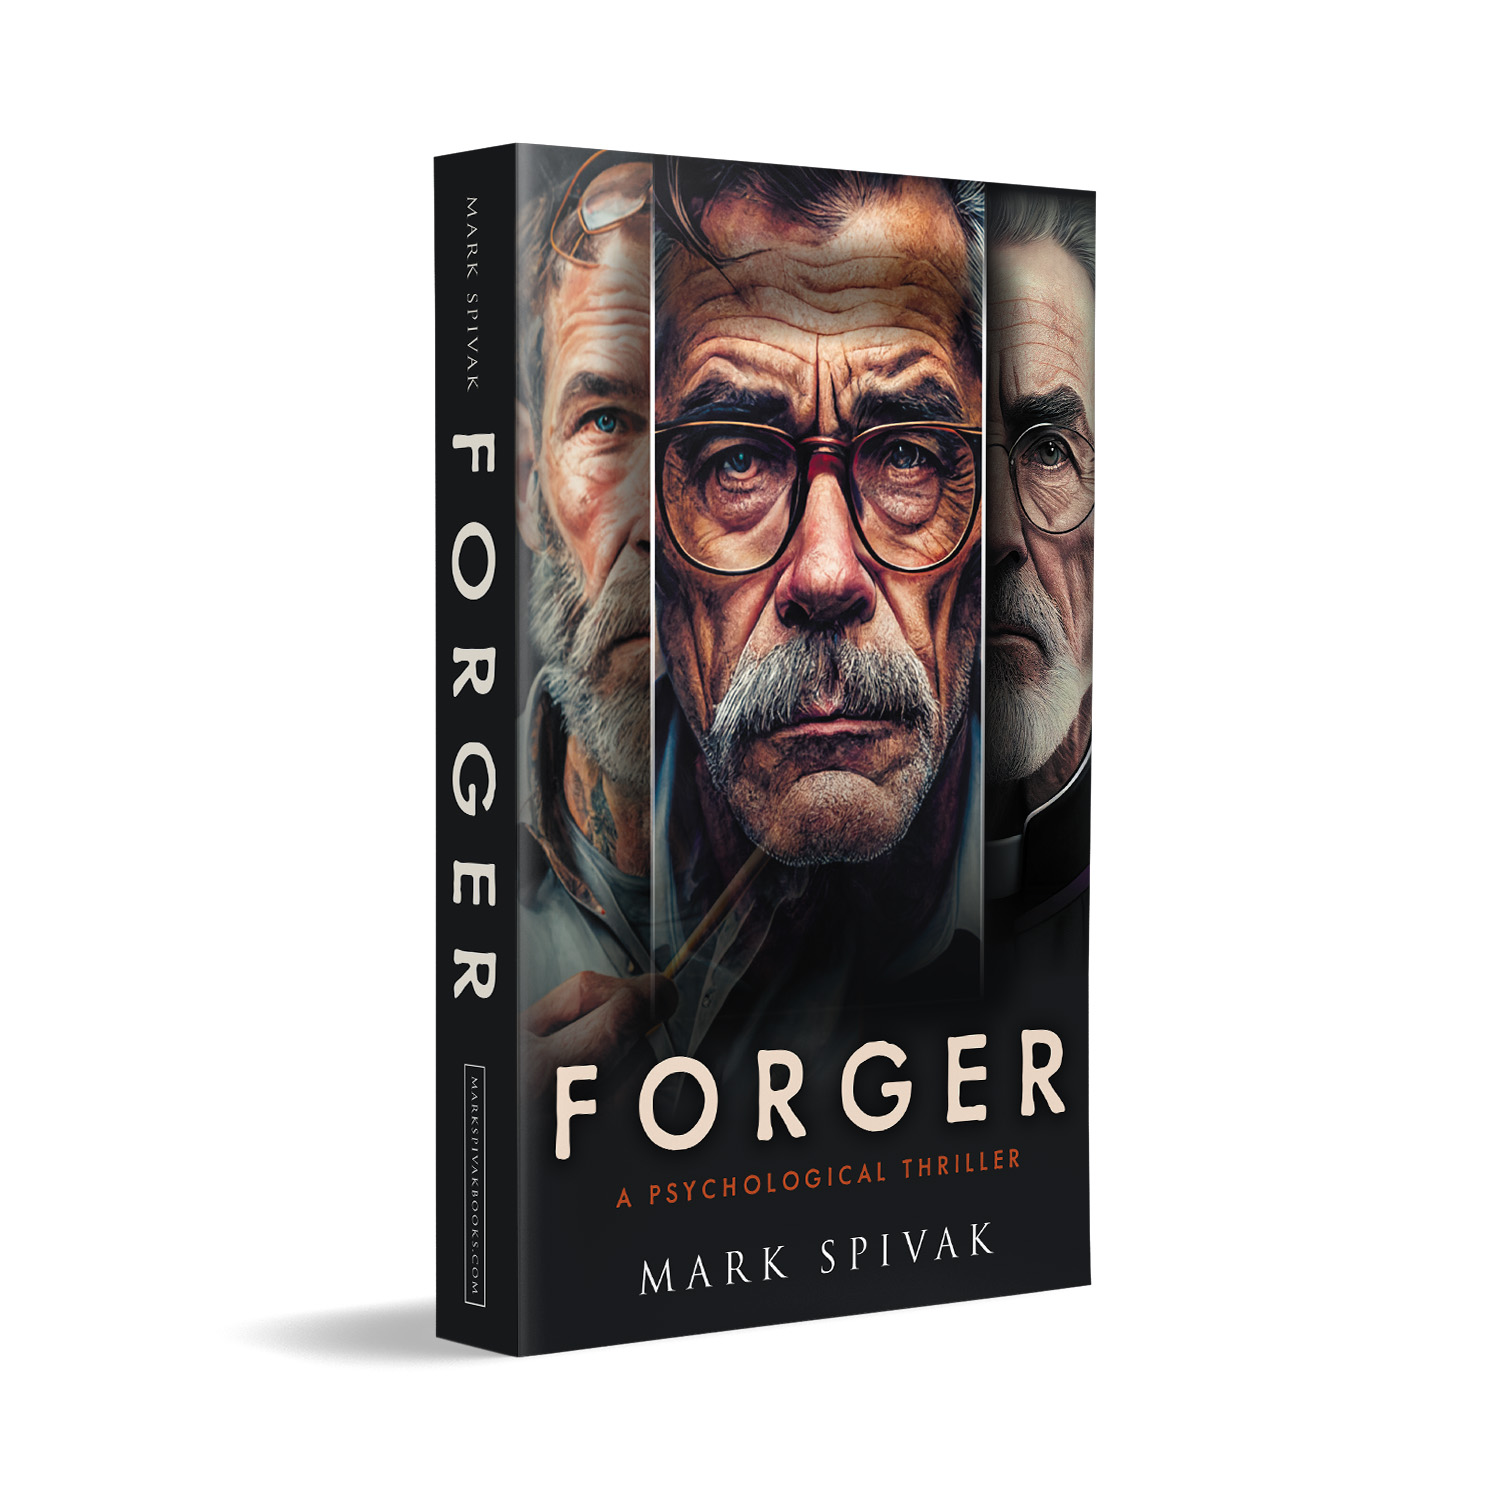 'Forger' is an intense psychological thriller by Mark Spivak. The book cover and interior formatting are by Mark Thomas. To learn more about what Mark could do for your book, please visit coverness.com.